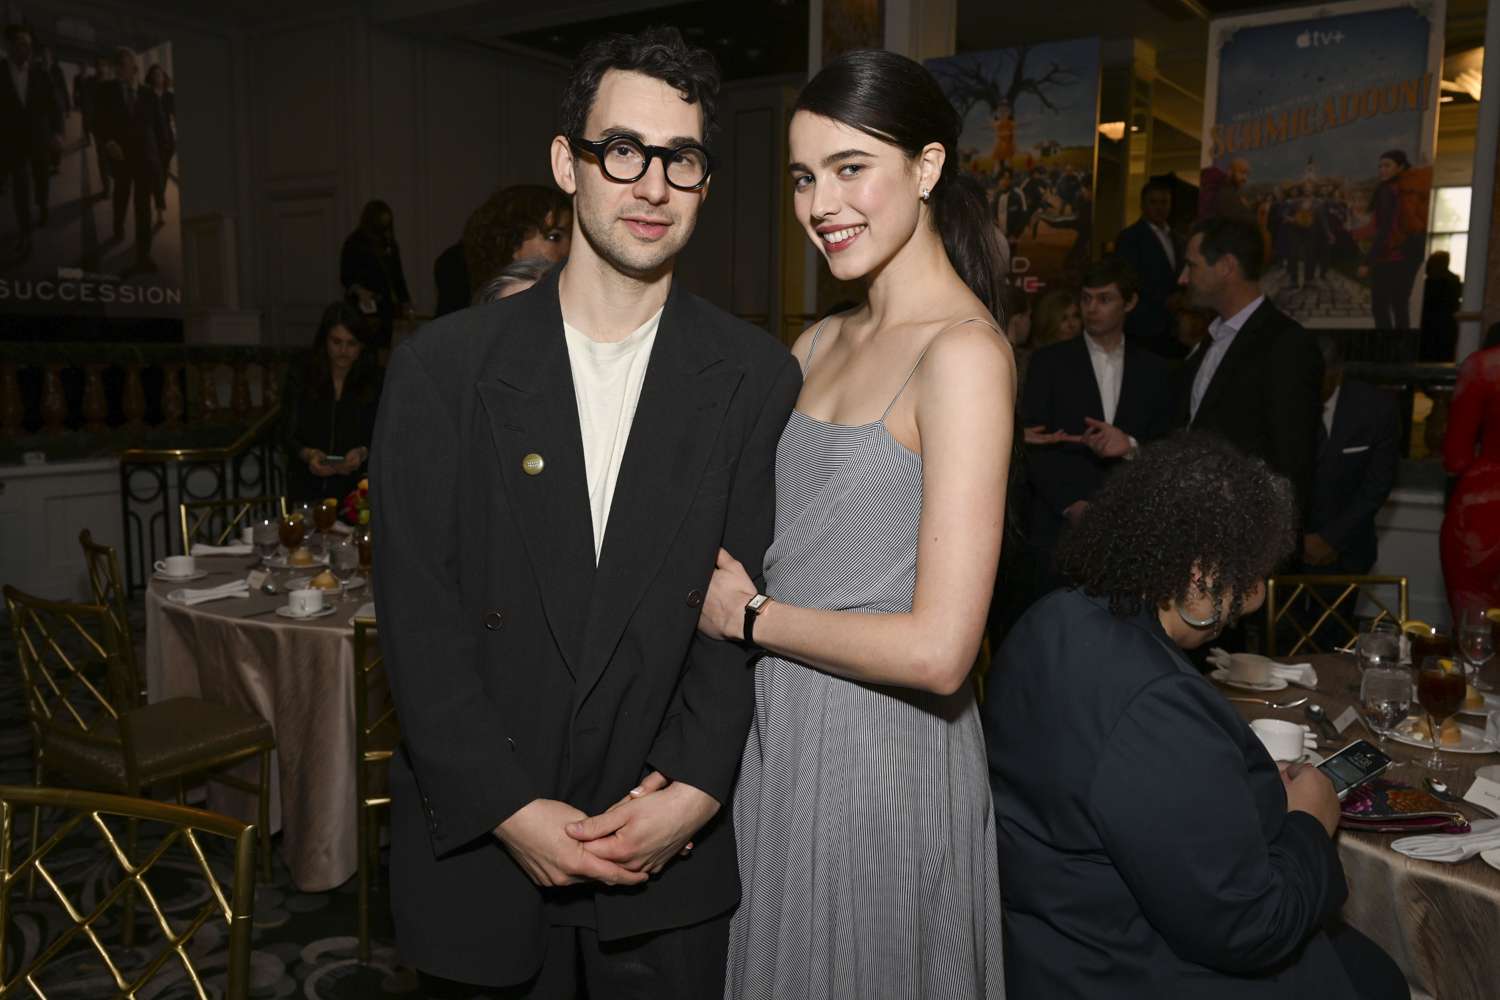 Jack Antonoff wearing a suit and Margaret Qualley wearing a gray dress